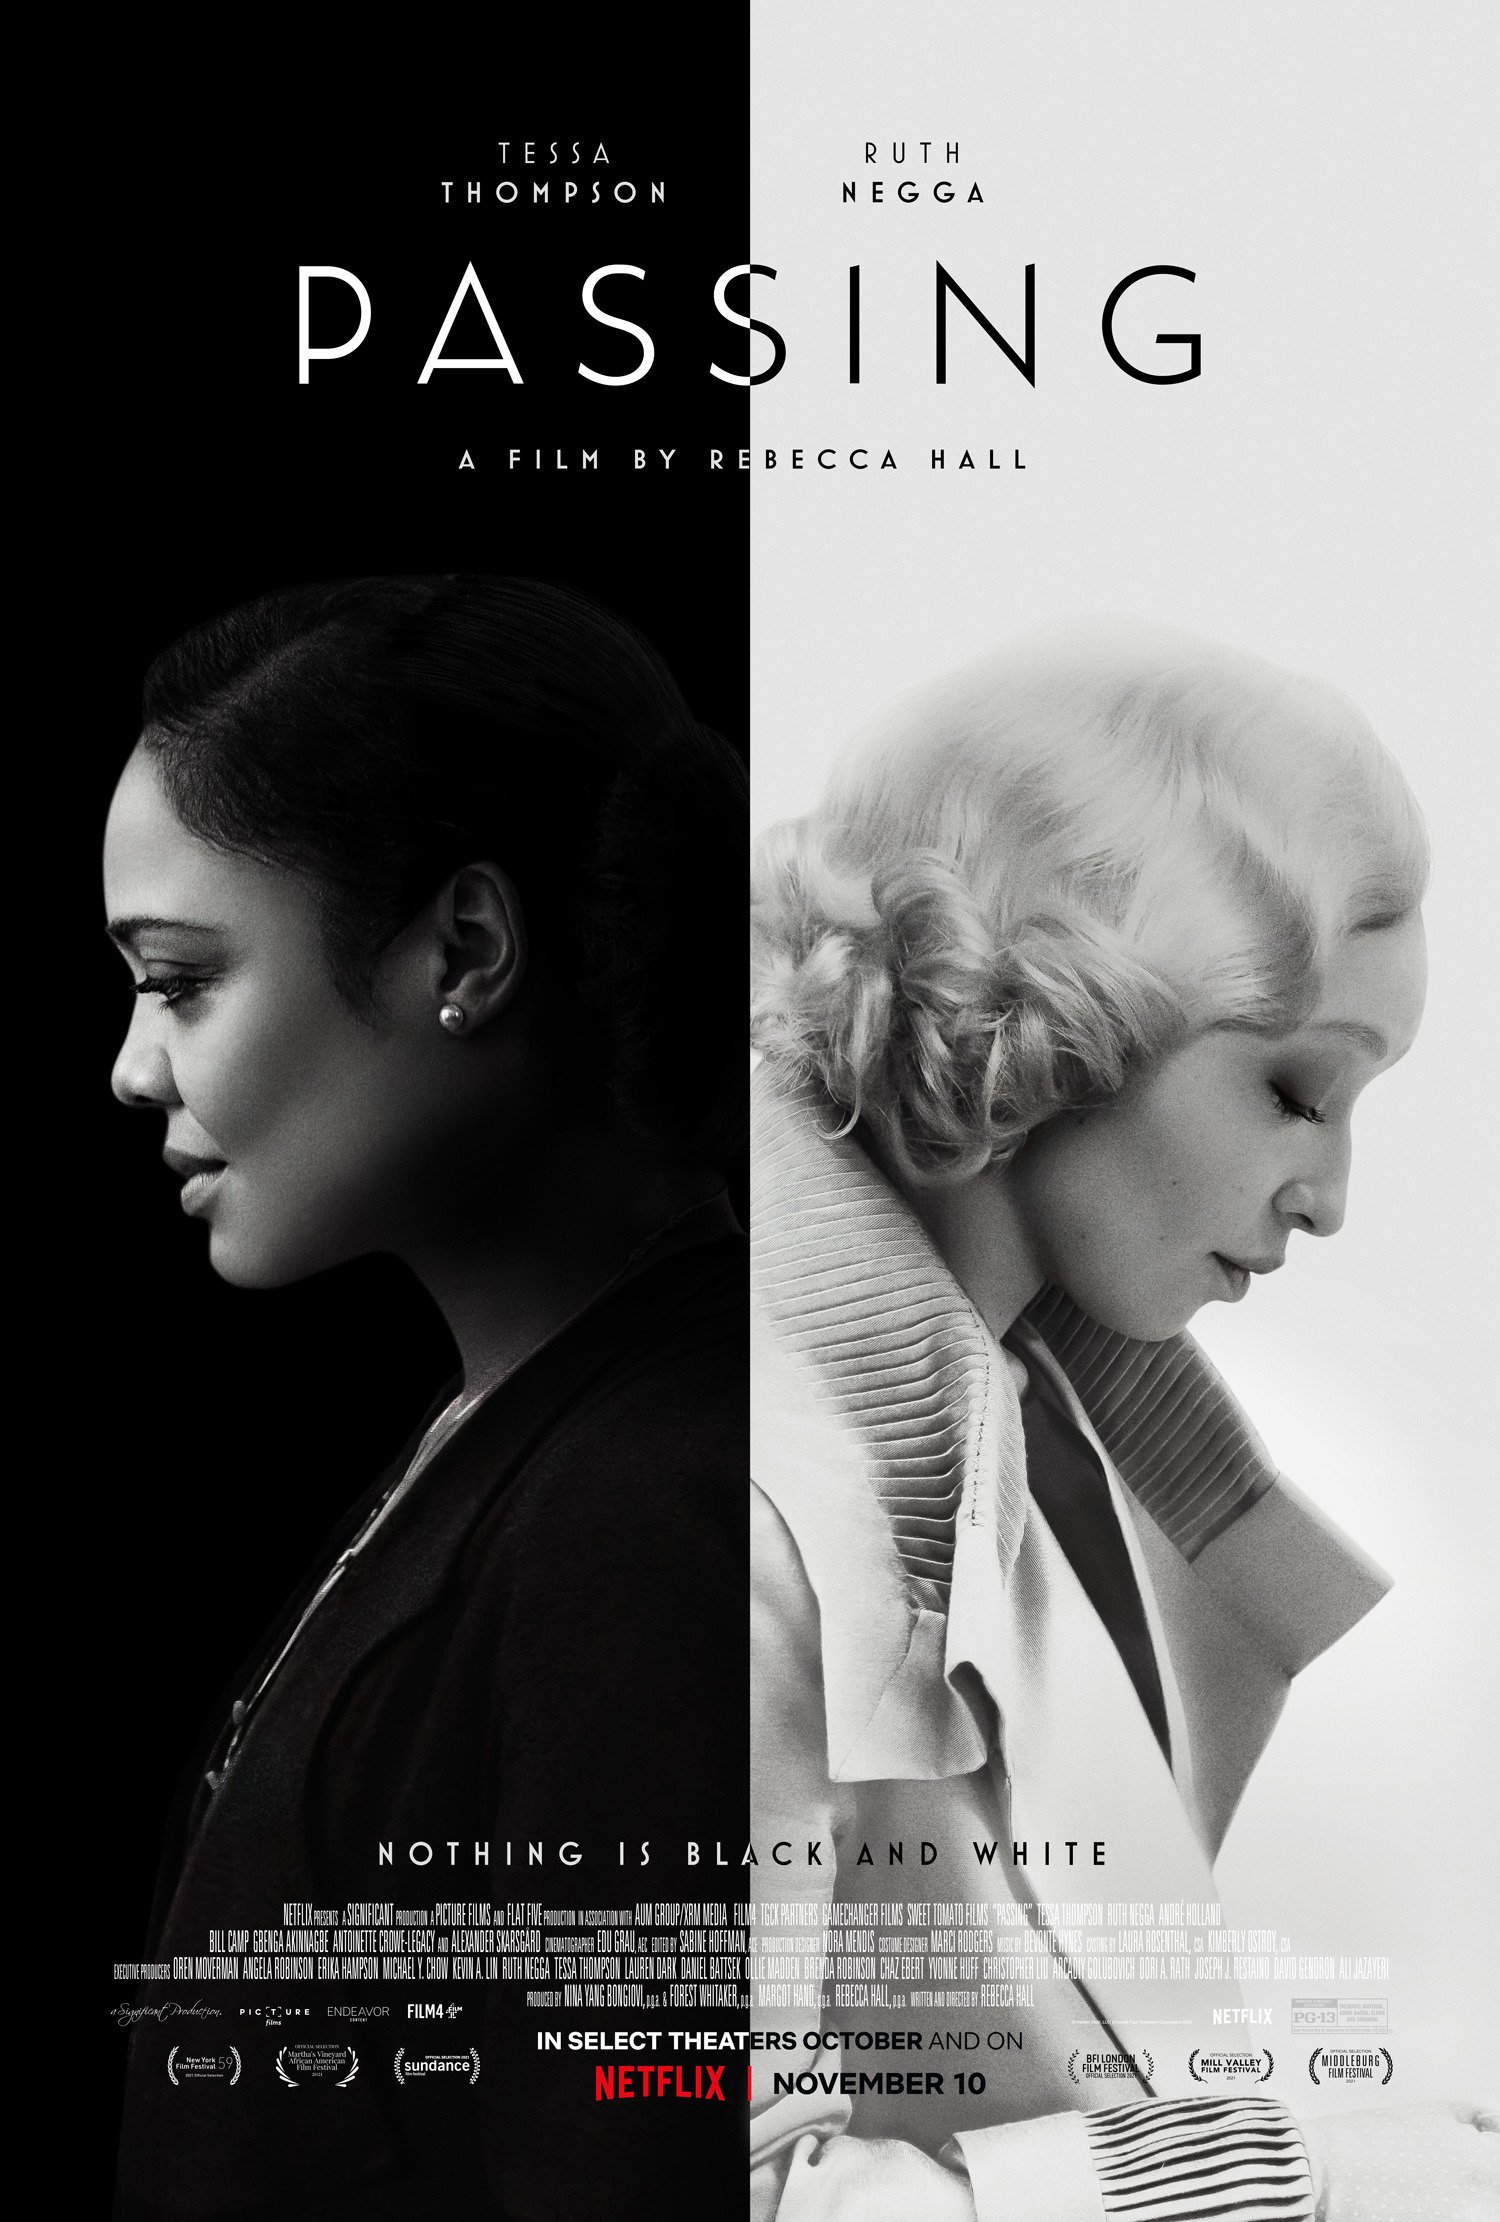 "Passing" revealed a trailer, in order to marry a wealthy businessman, black women posing as white